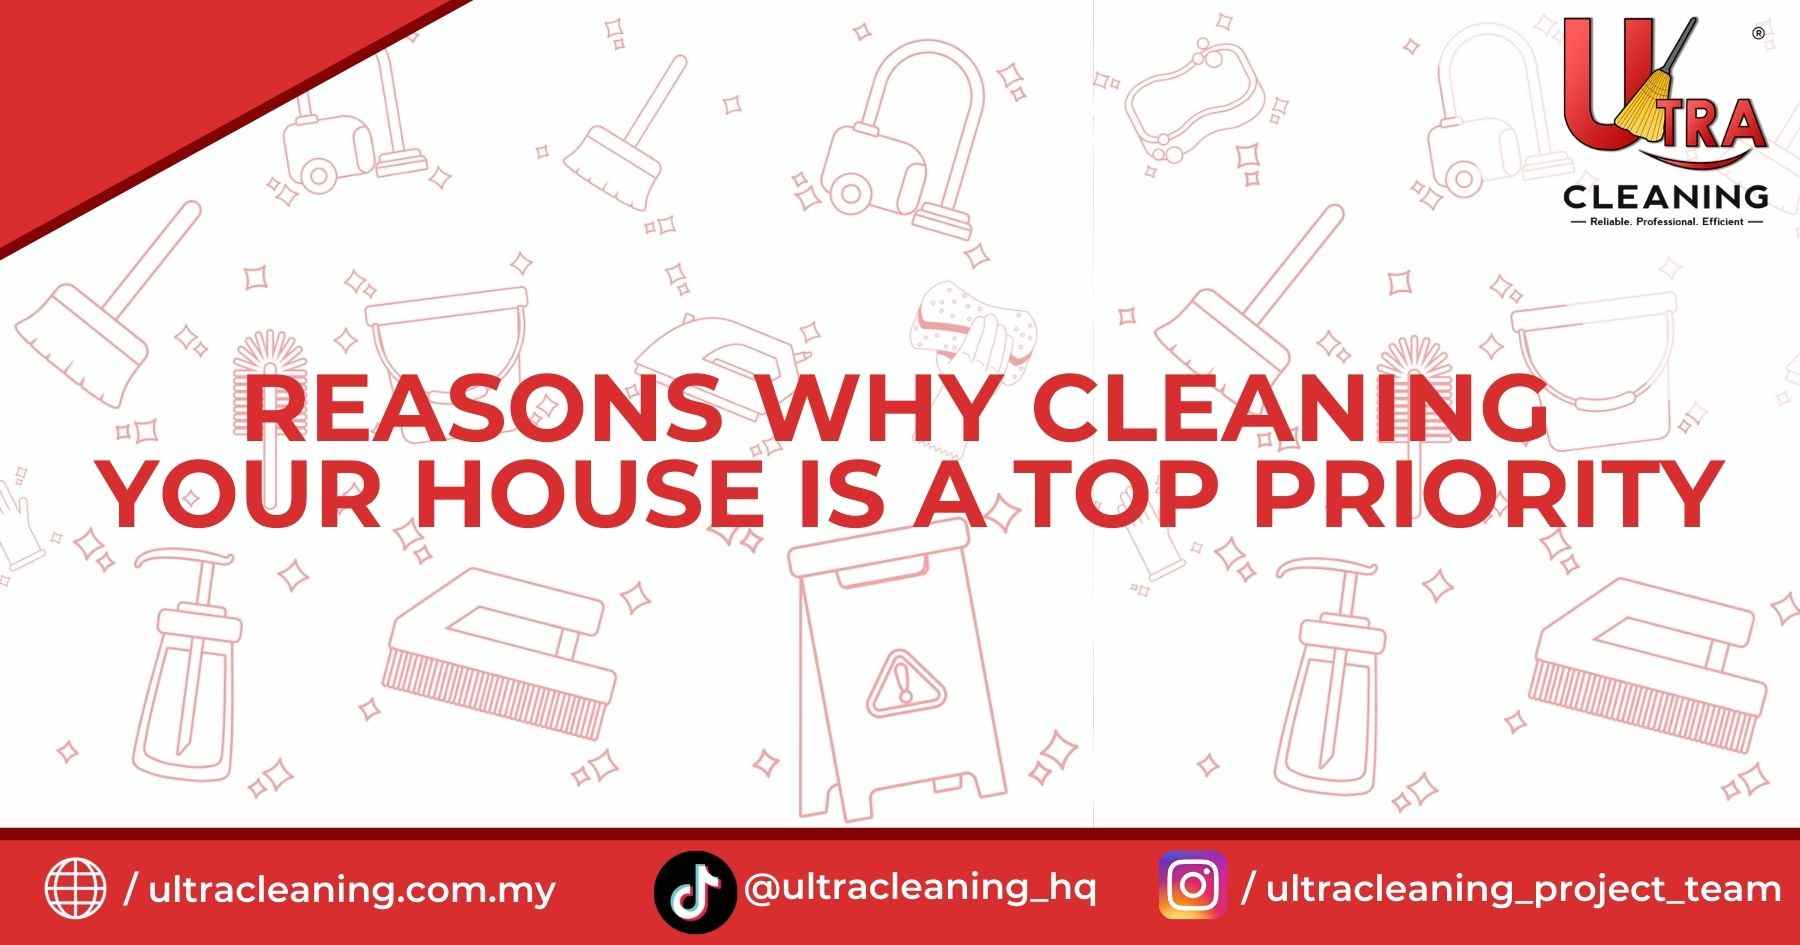 Reasons Why Cleaning Your House Is a Top Priority